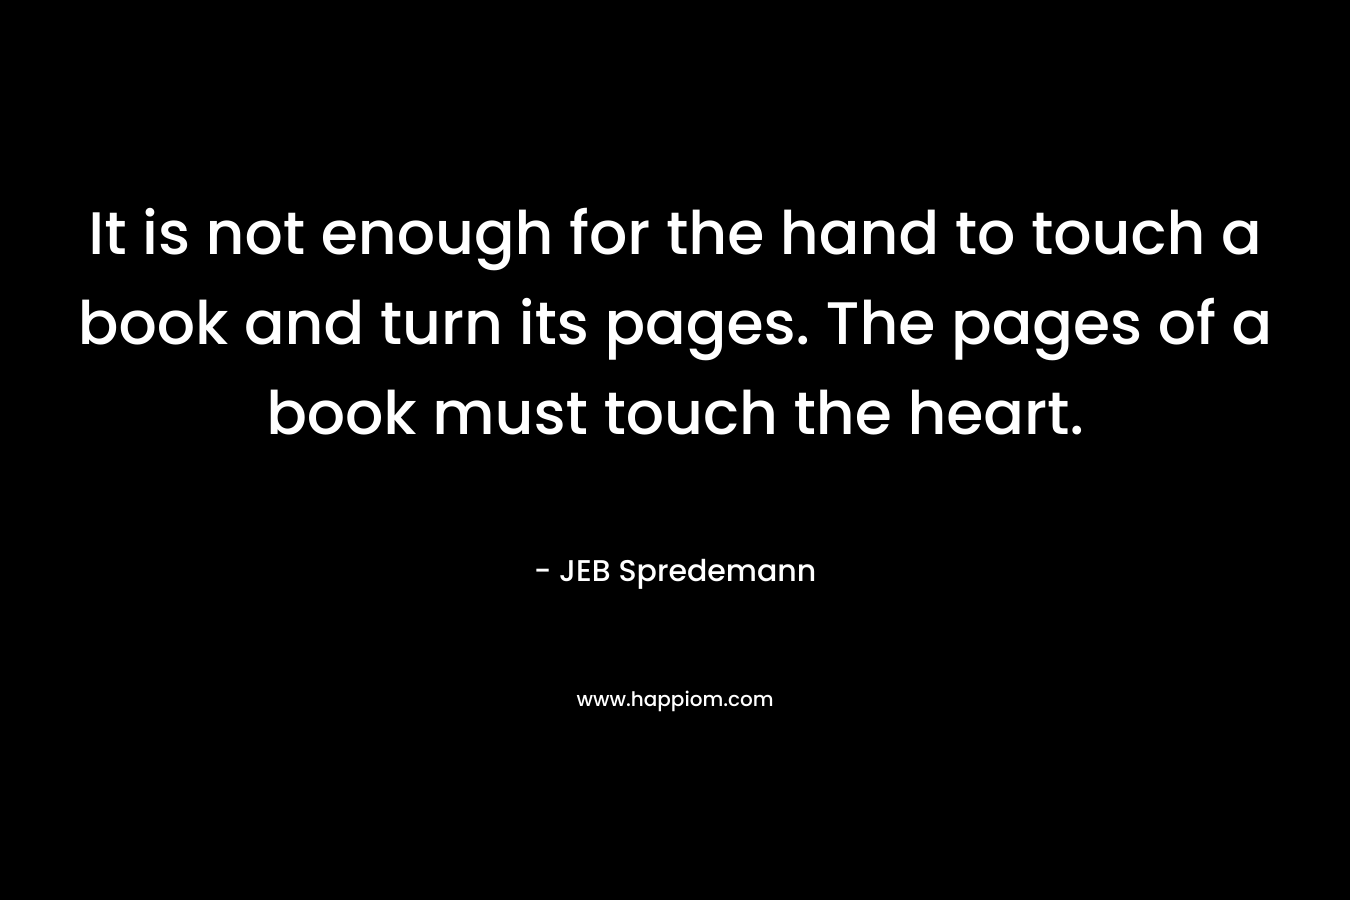 It is not enough for the hand to touch a book and turn its pages. The pages of a book must touch the heart.